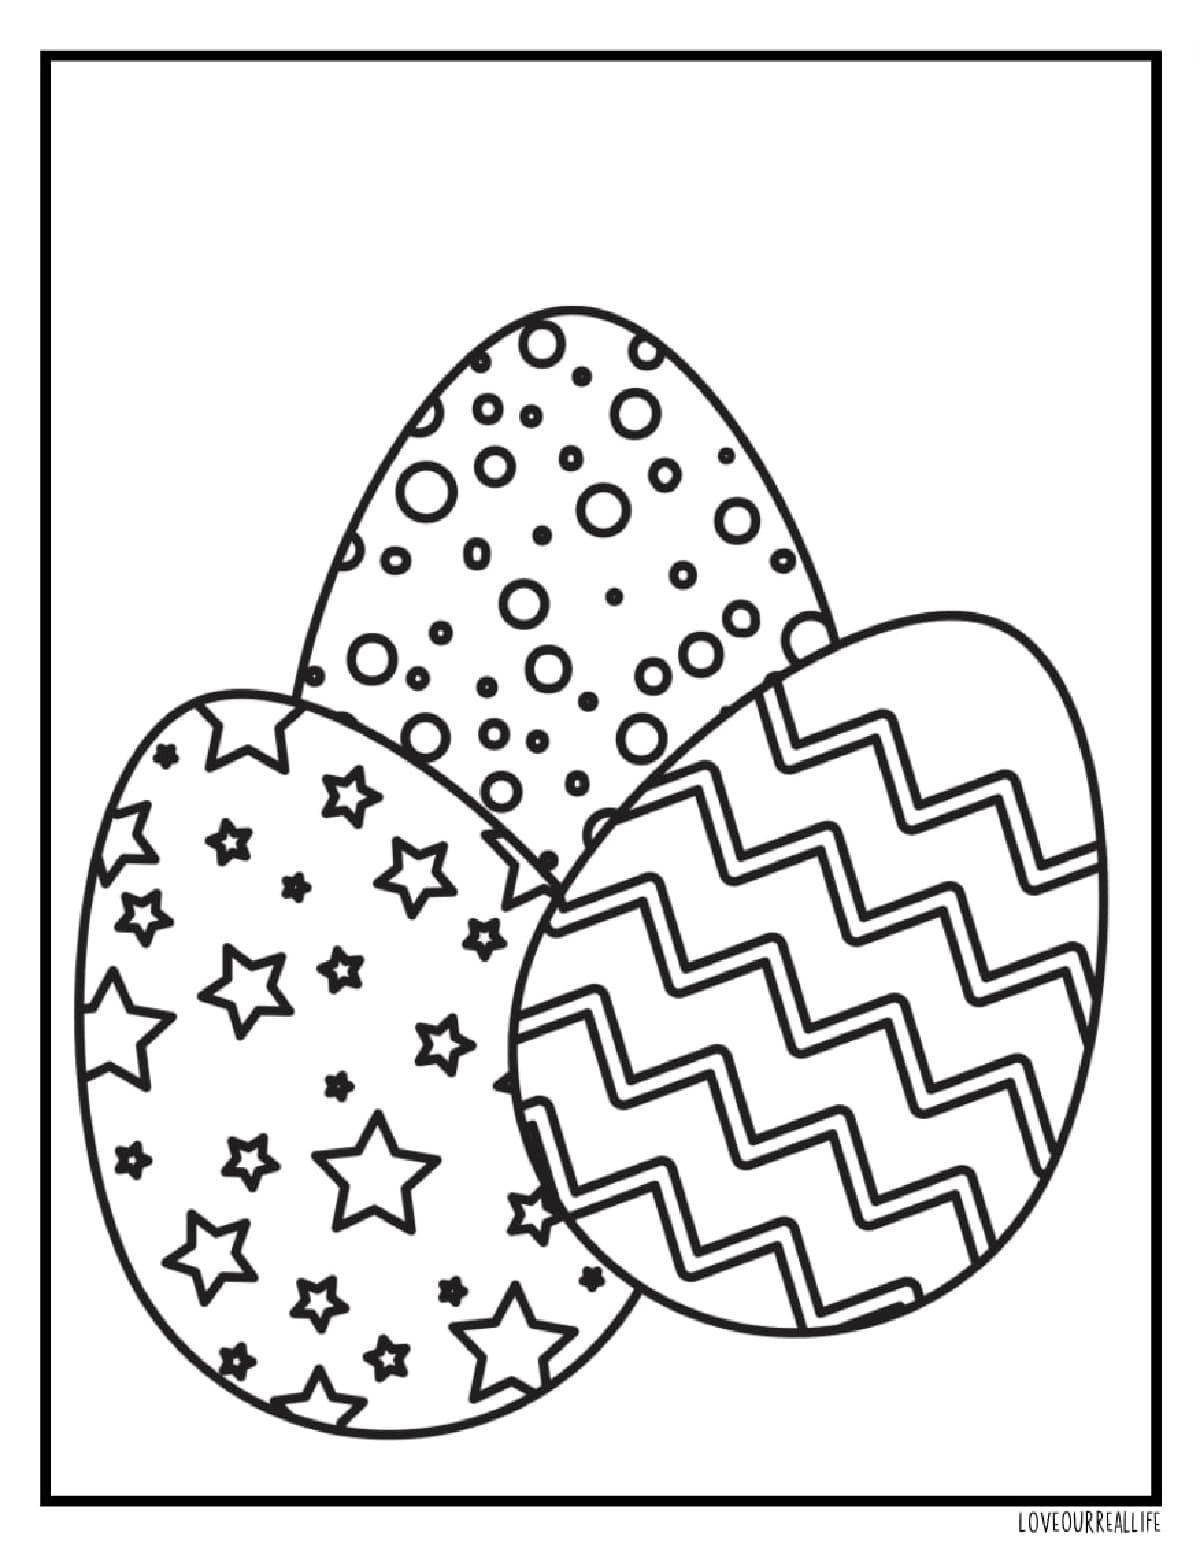 Easter egg coloring pages and free printable egg templates â love our real life